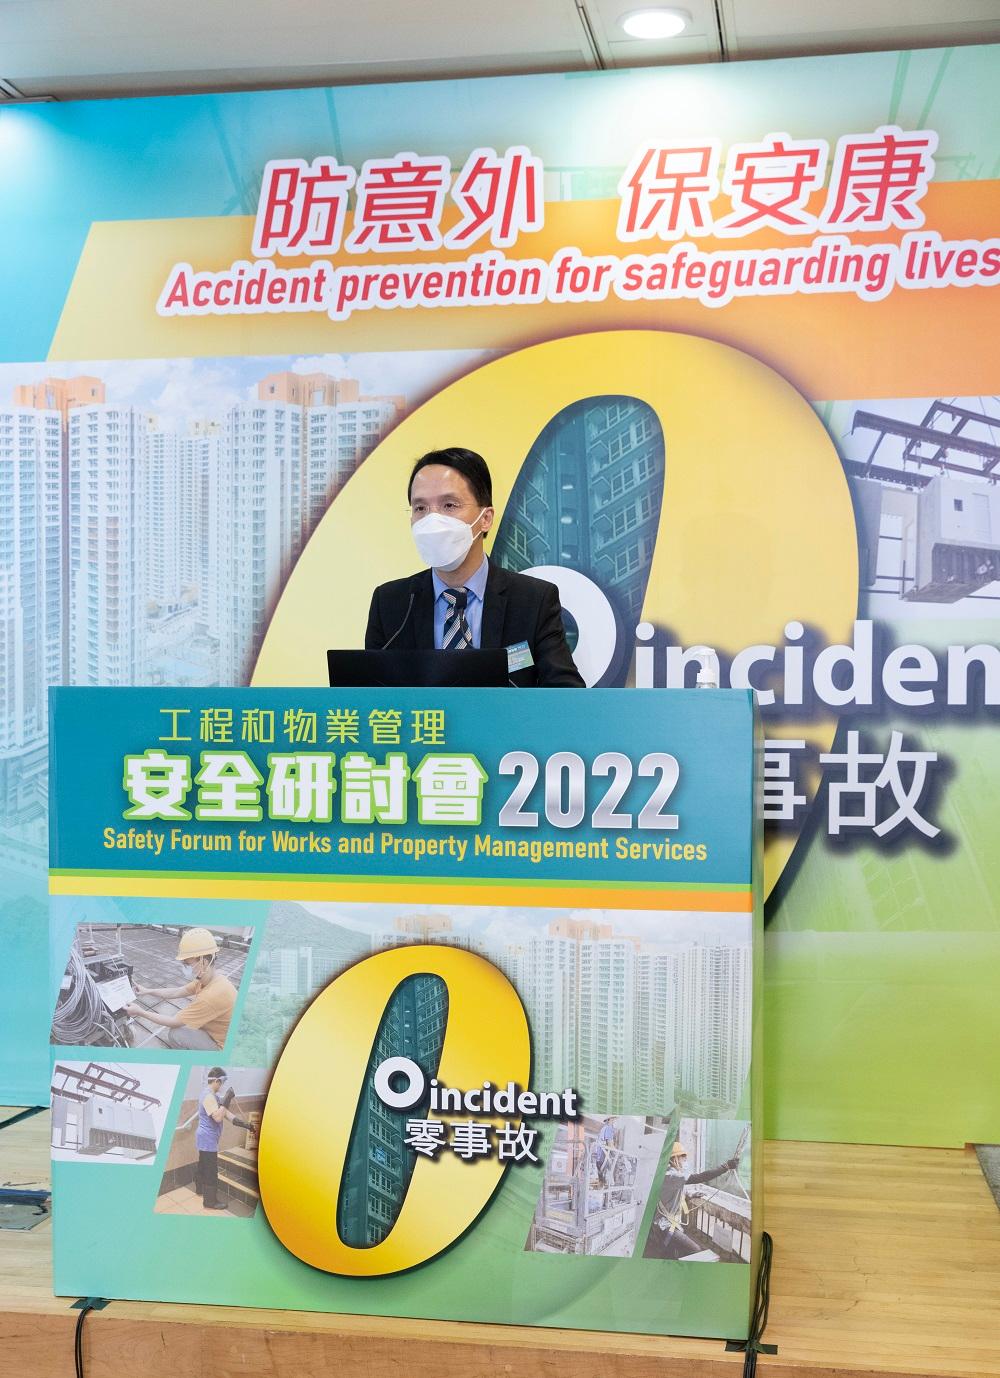 The Safety Forum for Works and Property Management Services 2022 was conducted in the form of webinar yesterday (December 6) and attracted about 800 online participants. Picture shows a speaker sharing the latest safety information online with industry practitioners.



